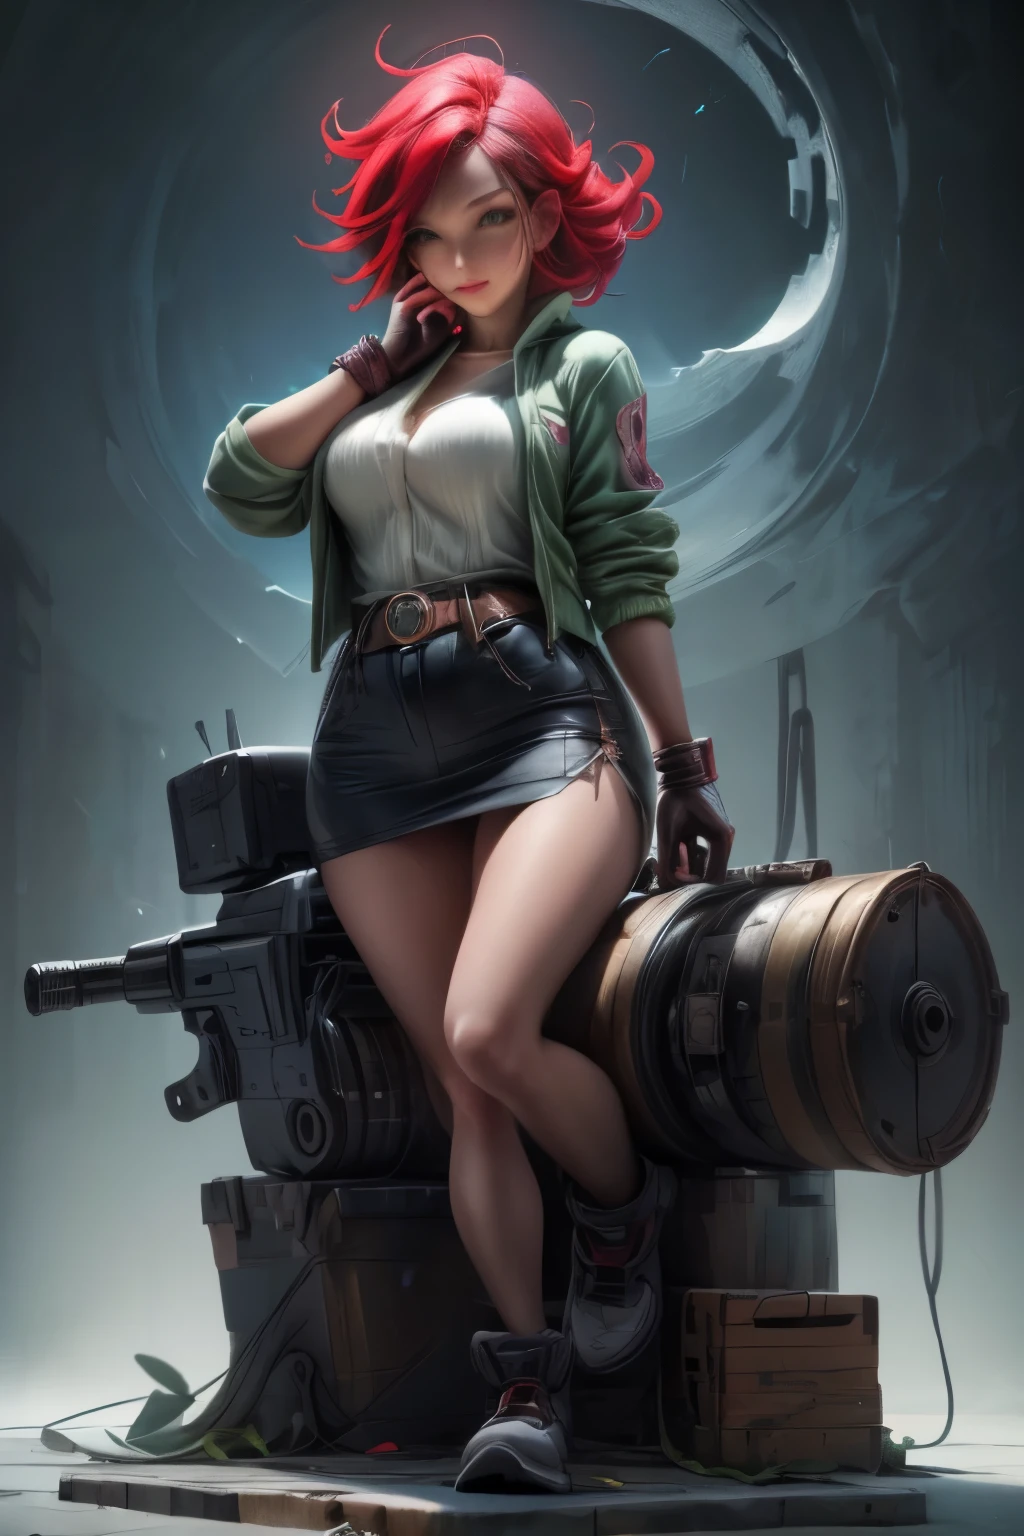 "QONITA"((long shot:1.6)), Unreal Engine:1.4, Ultra Realistic CG K, Photorealistic:1.4, Skin Texture:1.4, ((artwork 1 young woman full body:1.5)), ((red hair green eyes, full lips and a sensual smile:1.5)), punk-style hairstyle with a shaved side, tattoos, Gatling gun, box, looking at the viewer, dynamic pose, blows, ammunition belt, gloves, large breasts, Shootout, Extremely detailed:1.4, more detailed, optical mix, playful patterns, animated texture, unique visual effect, pink leather miniskirt, pink jacket, masterpiece, background an abandoned place with scrap metal, ((colors, cyan, green, pink, brown : 1.2)), ((8k realistic digital art.)), 32k